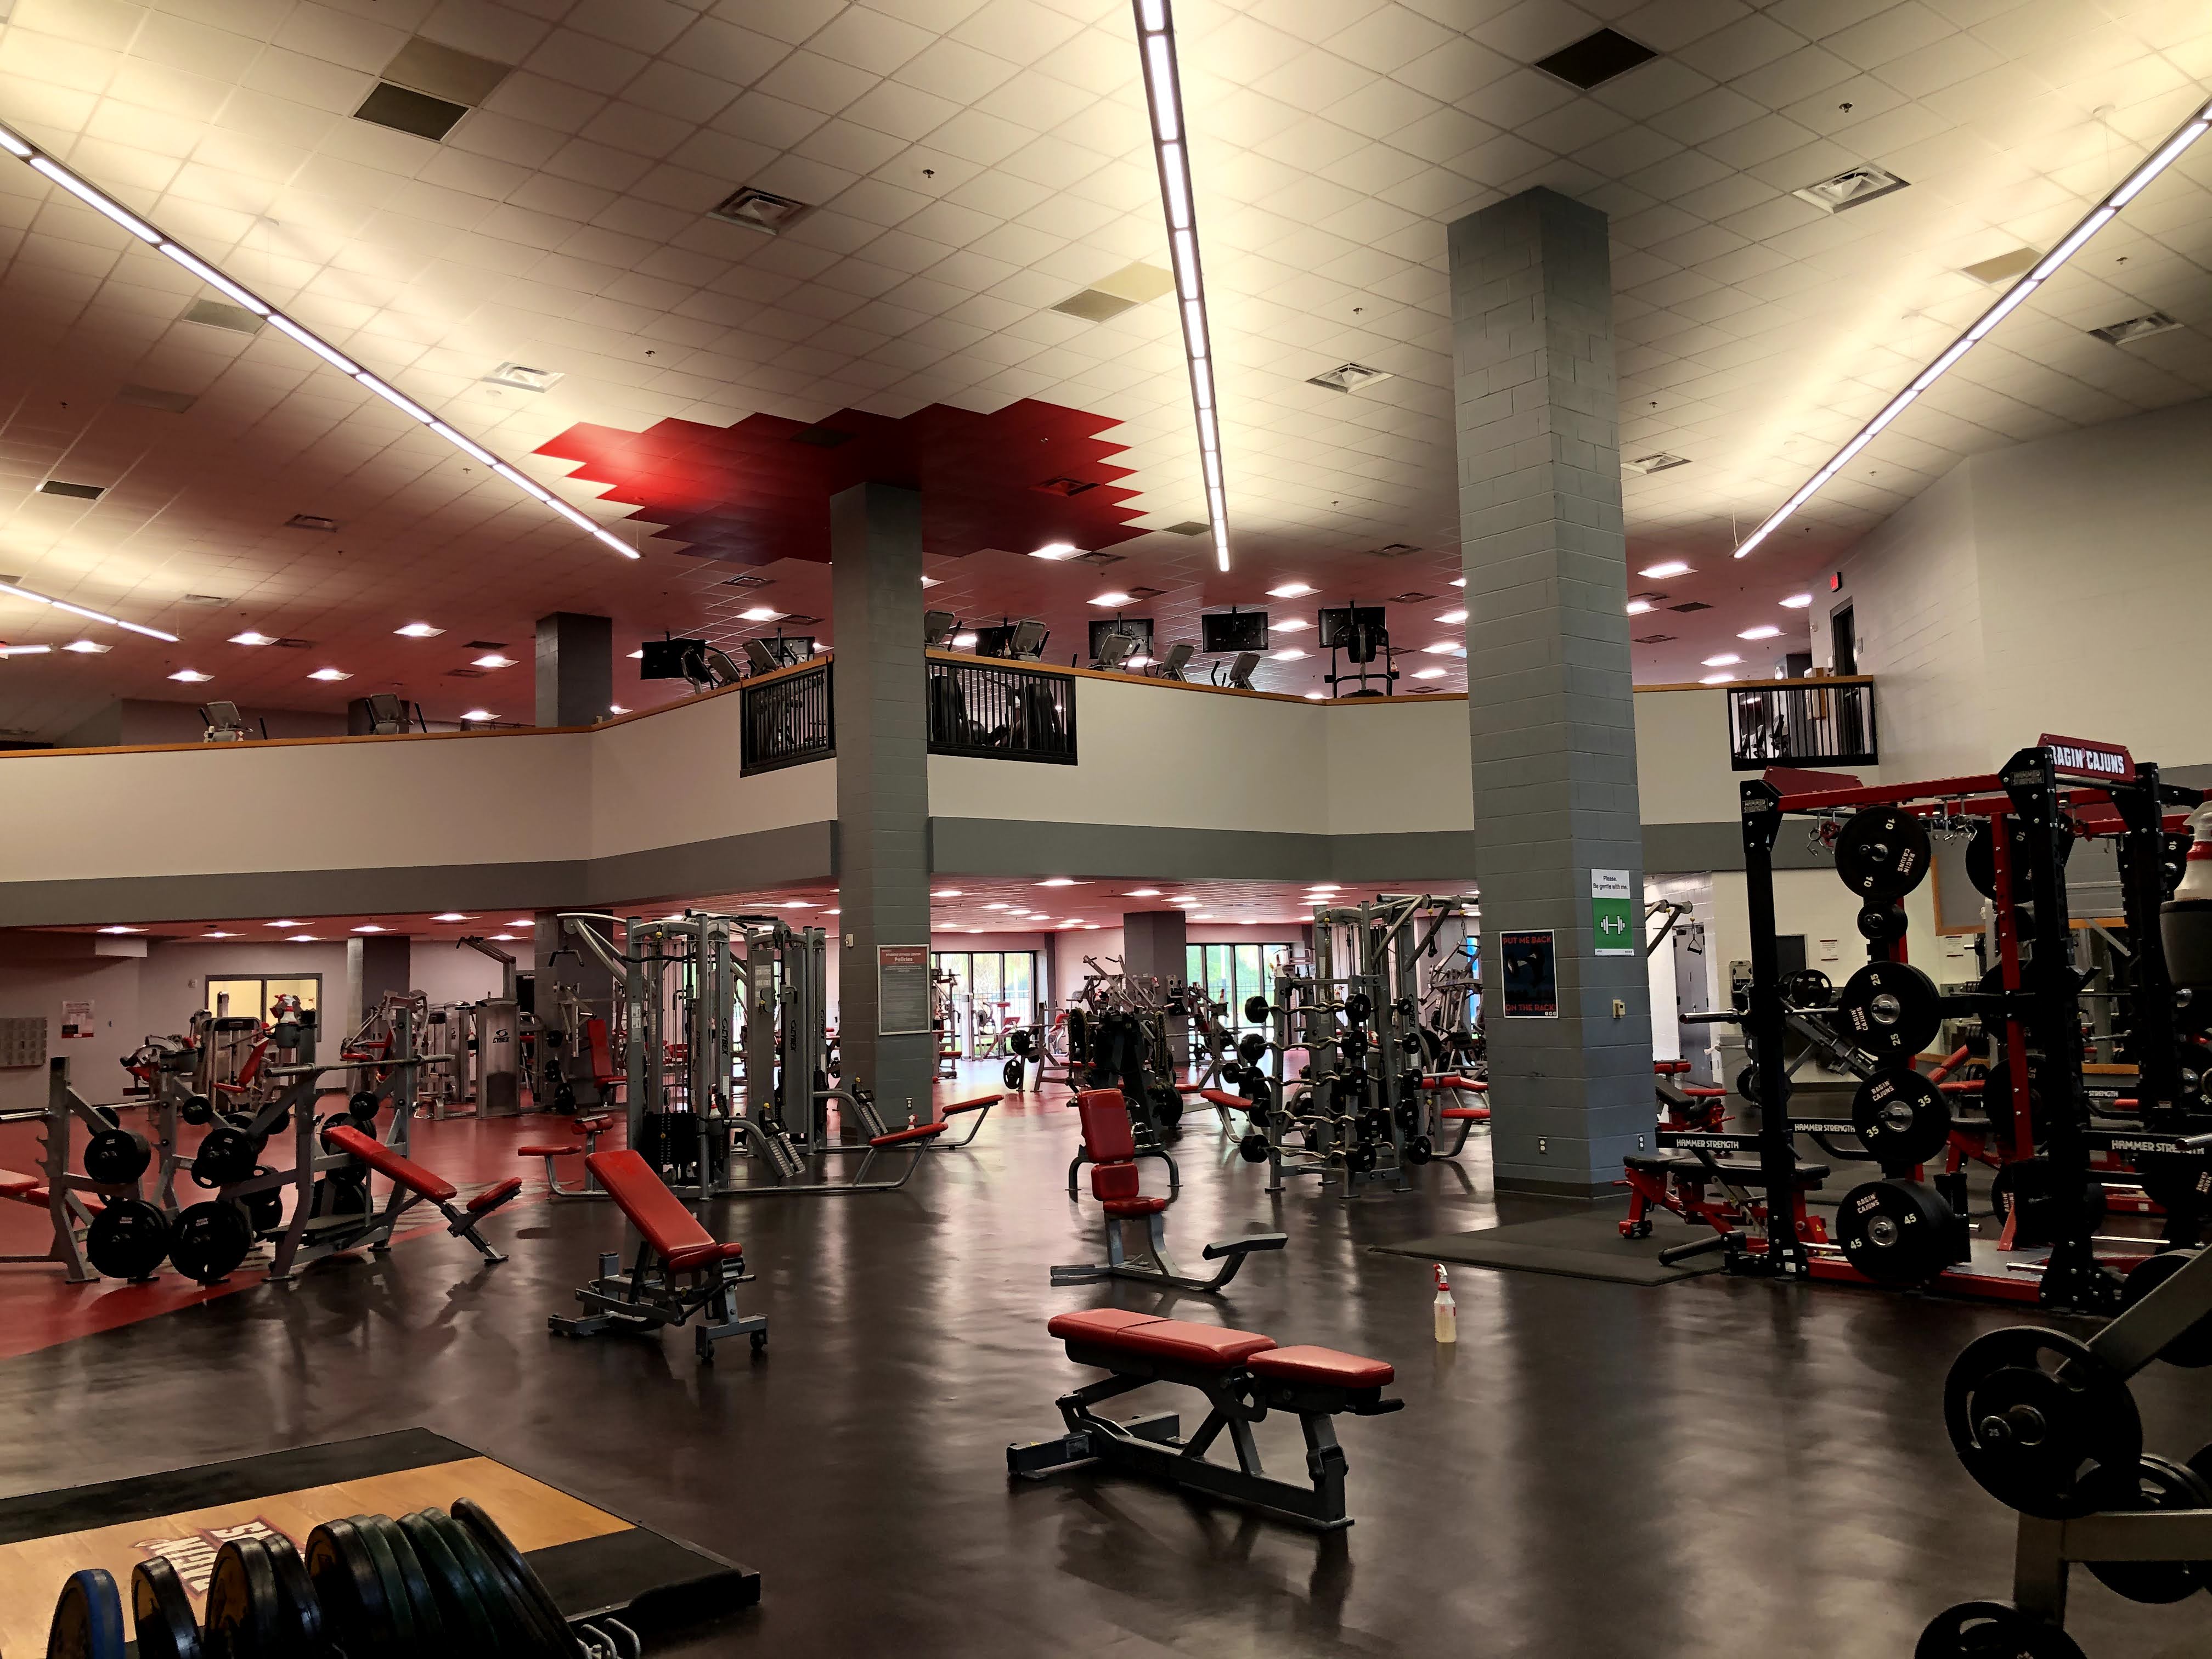 The Rec Room - Still time to get that Fitness Buff on your